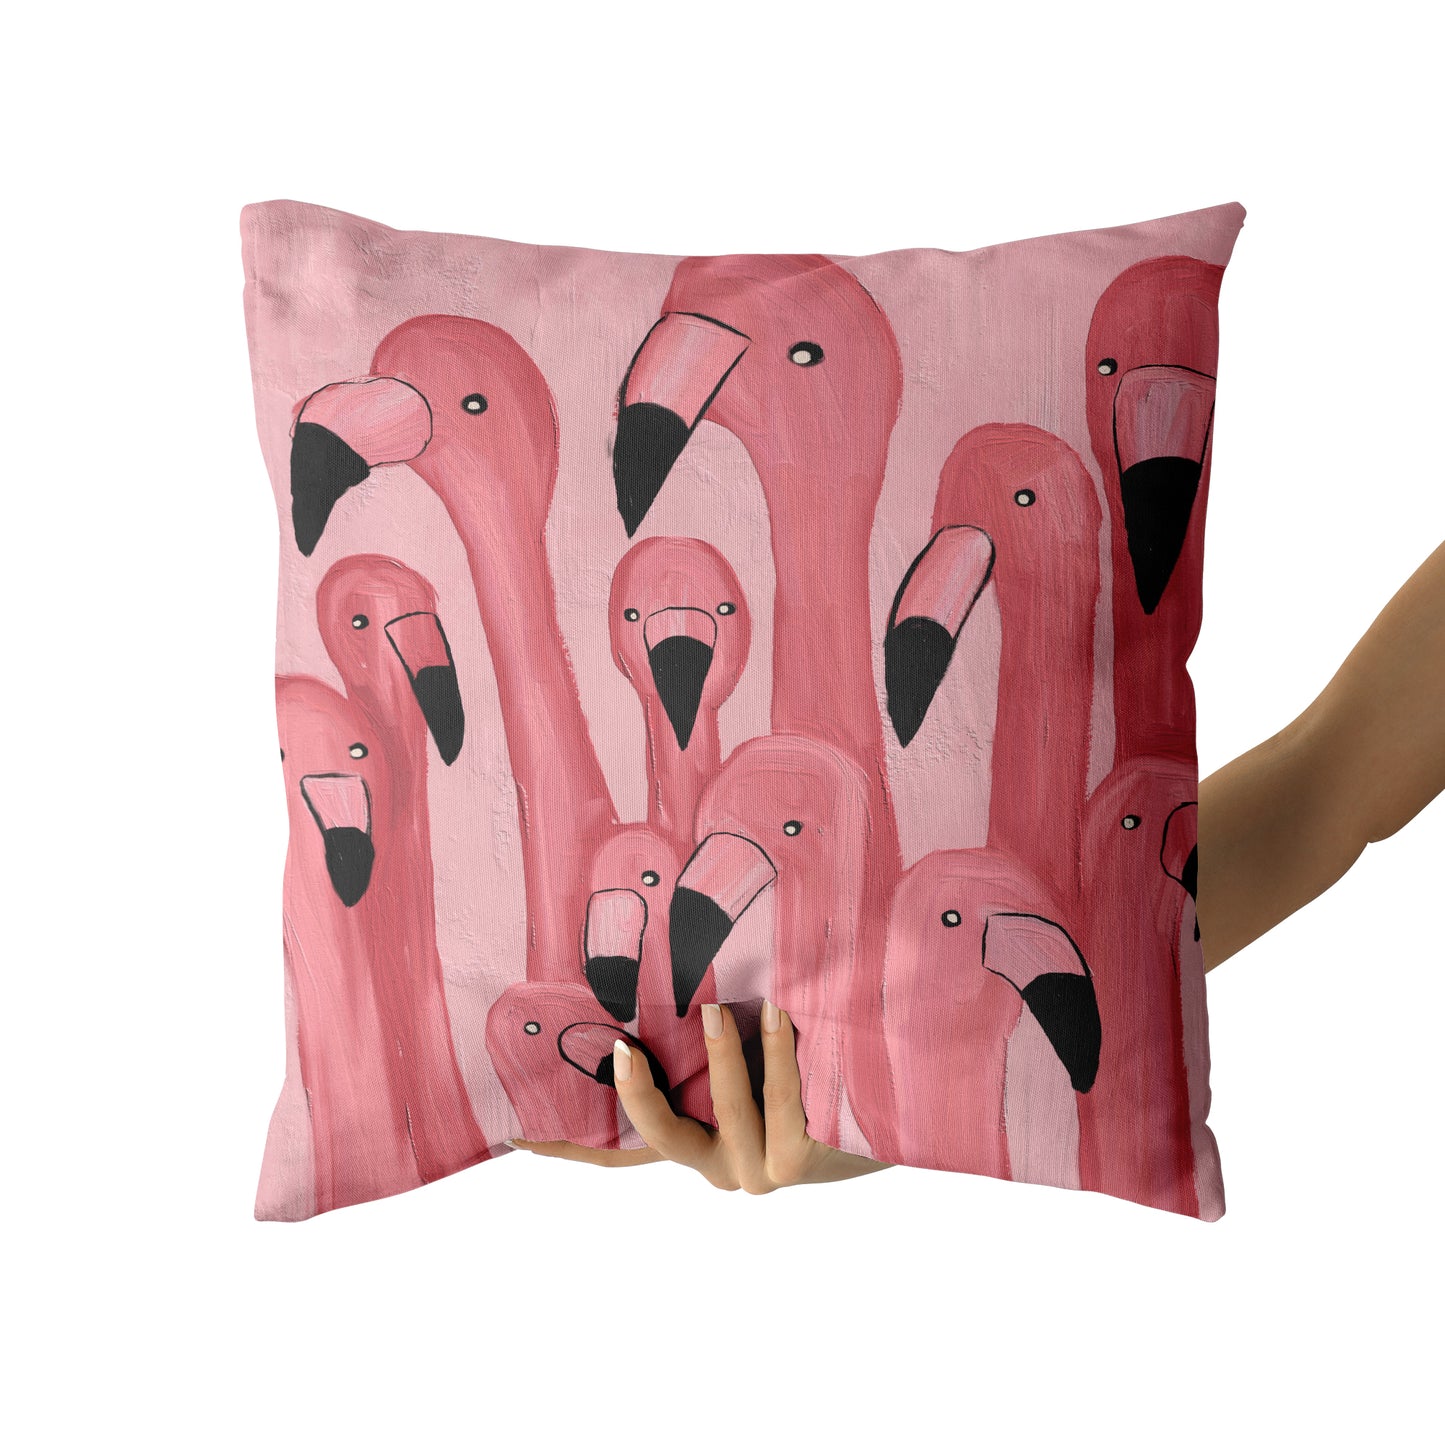 Throw Pillow with Cute Pink Flamingos